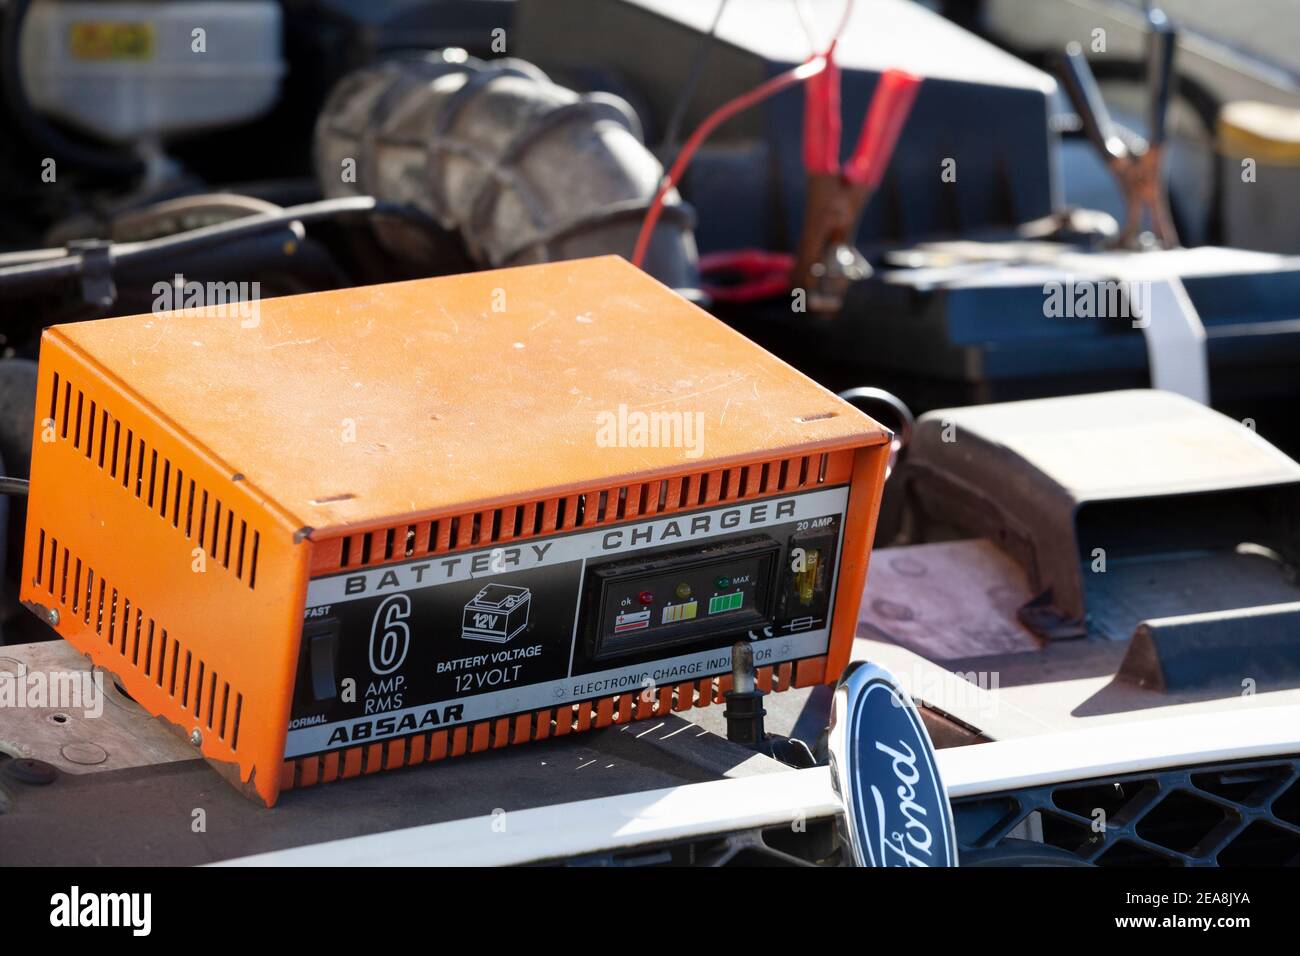 12v Car battery on charge Stock Photo